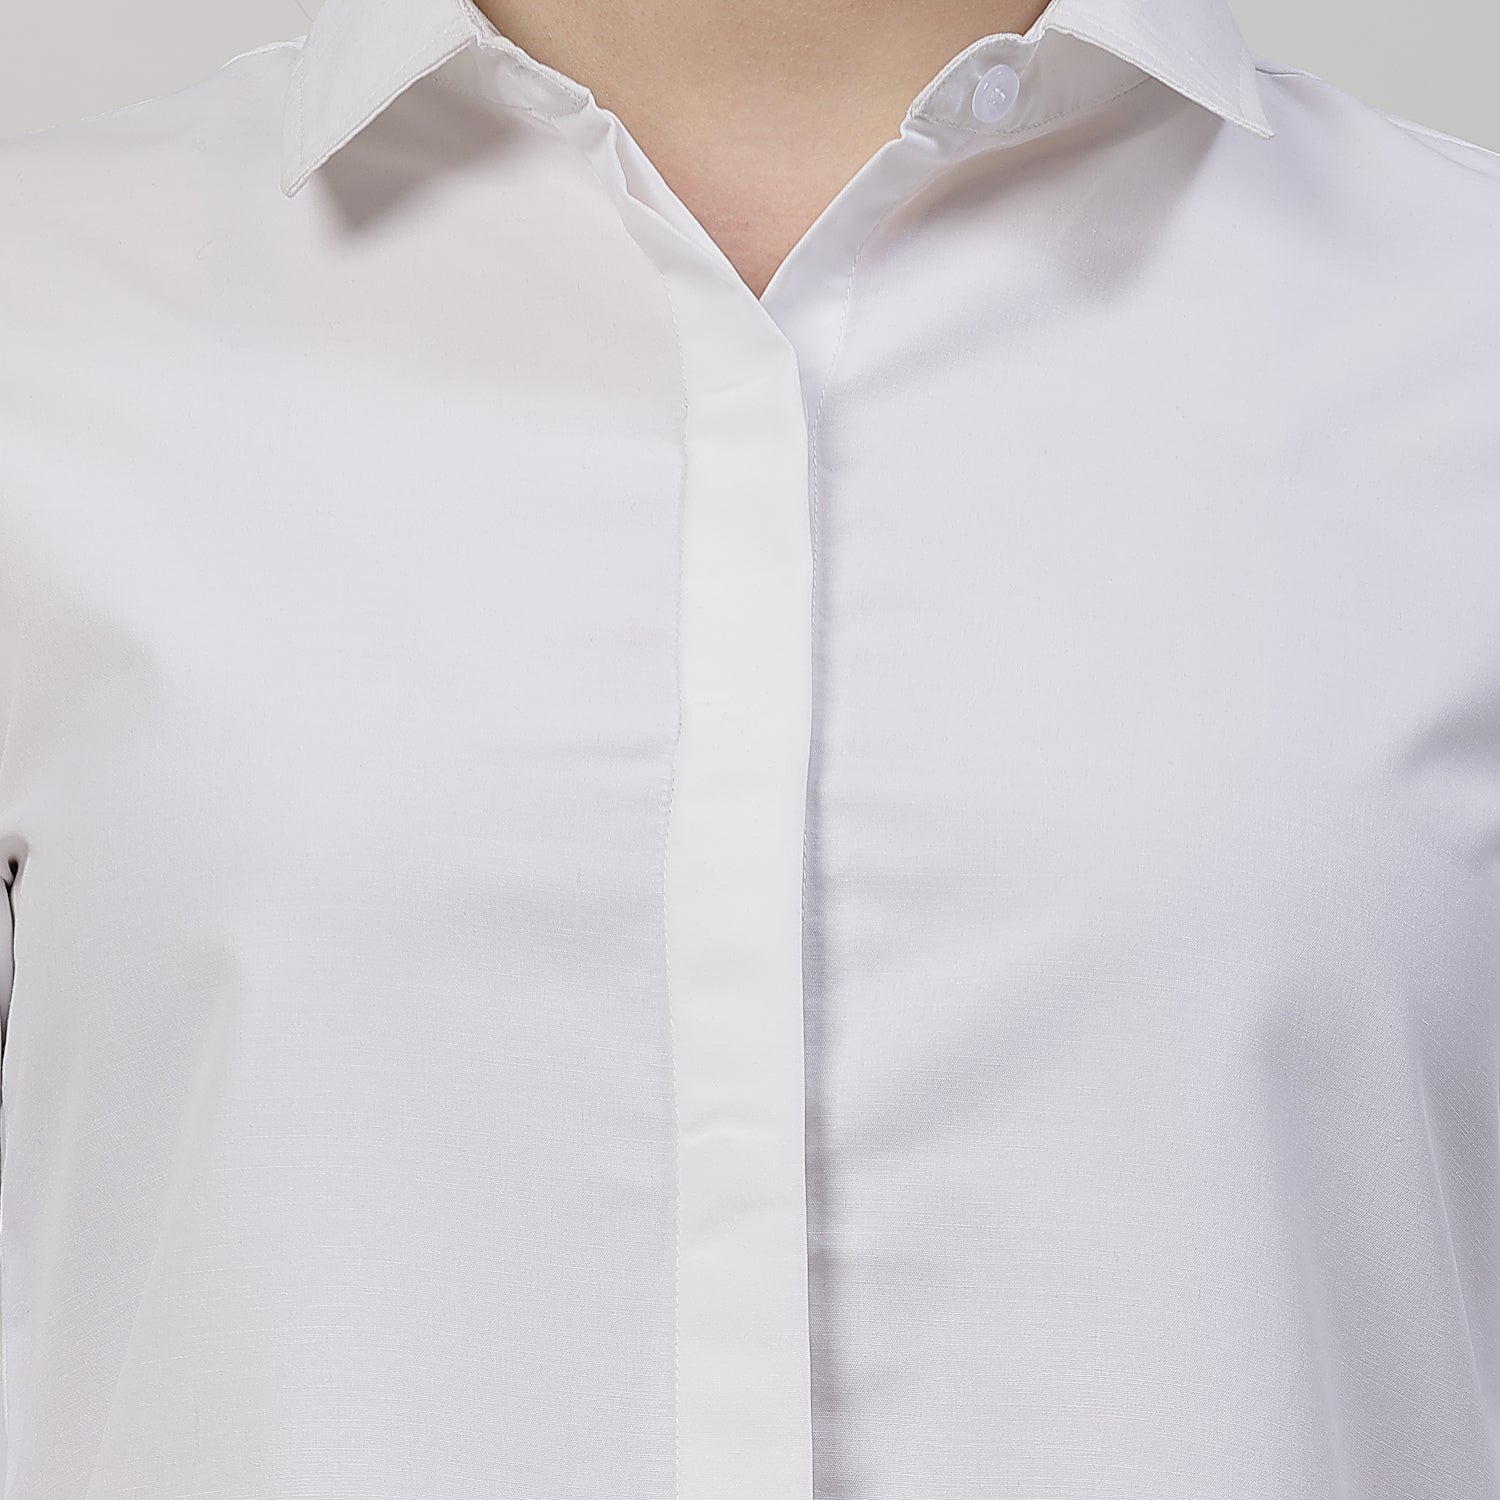 White Shirt With Collar